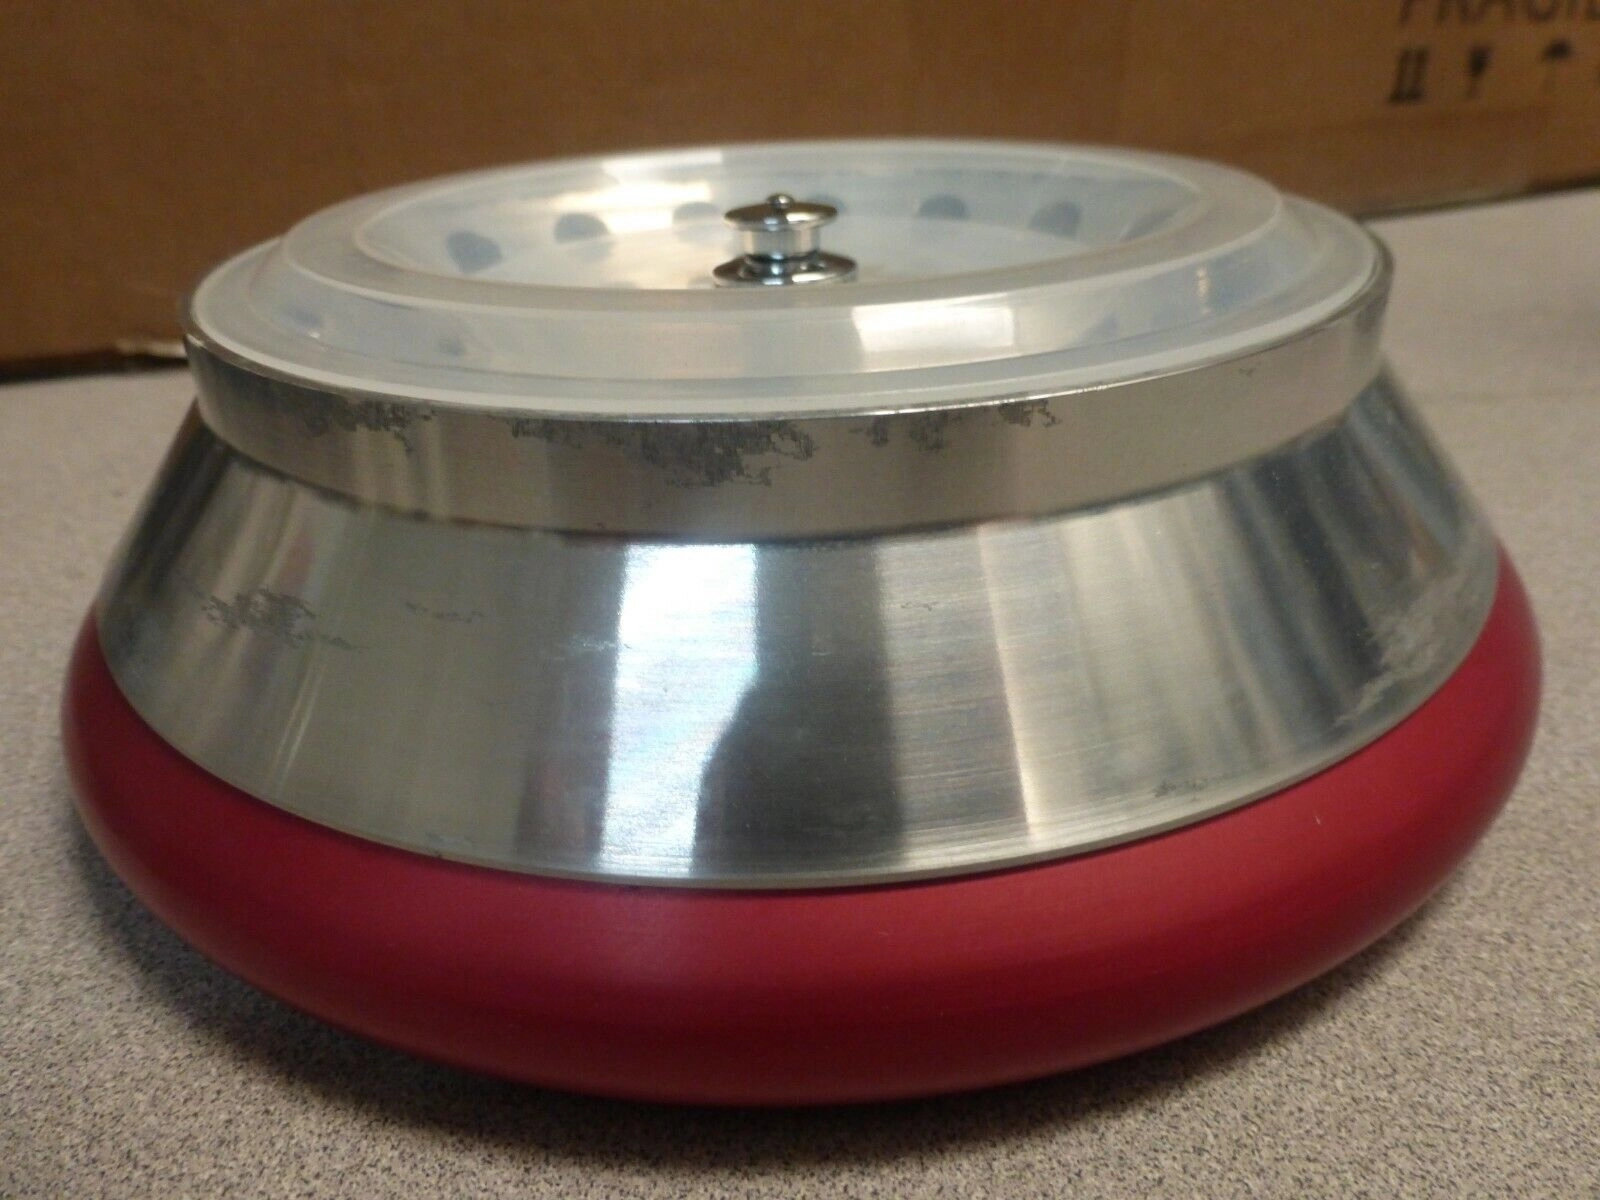 VWR GALAXY 20R - 35 PLACE ROTOR WITH LID (16275/rt